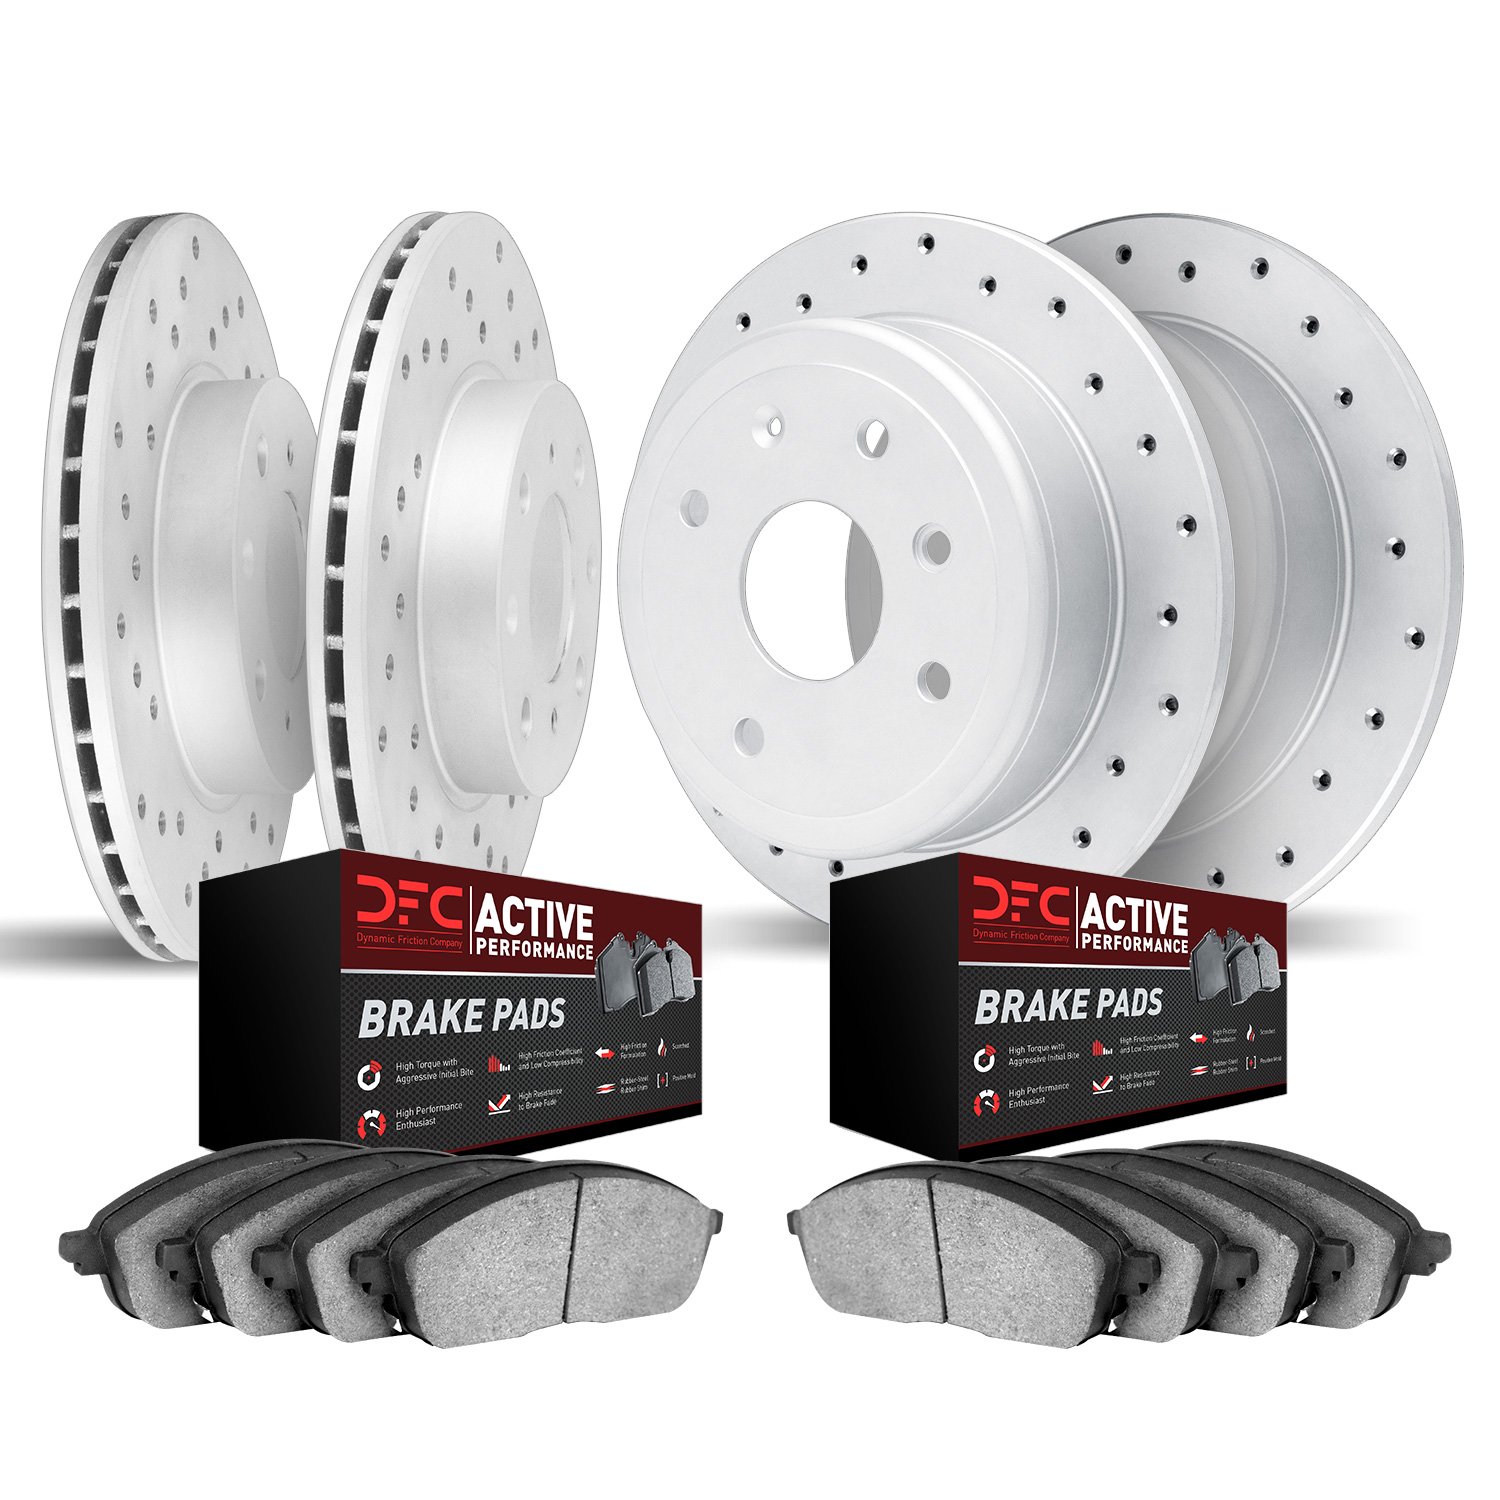 2704-59018 Geoperformance Drilled Brake Rotors with Active Performance Pads Kit, 1998-2002 Acura/Honda, Position: Front and Rear